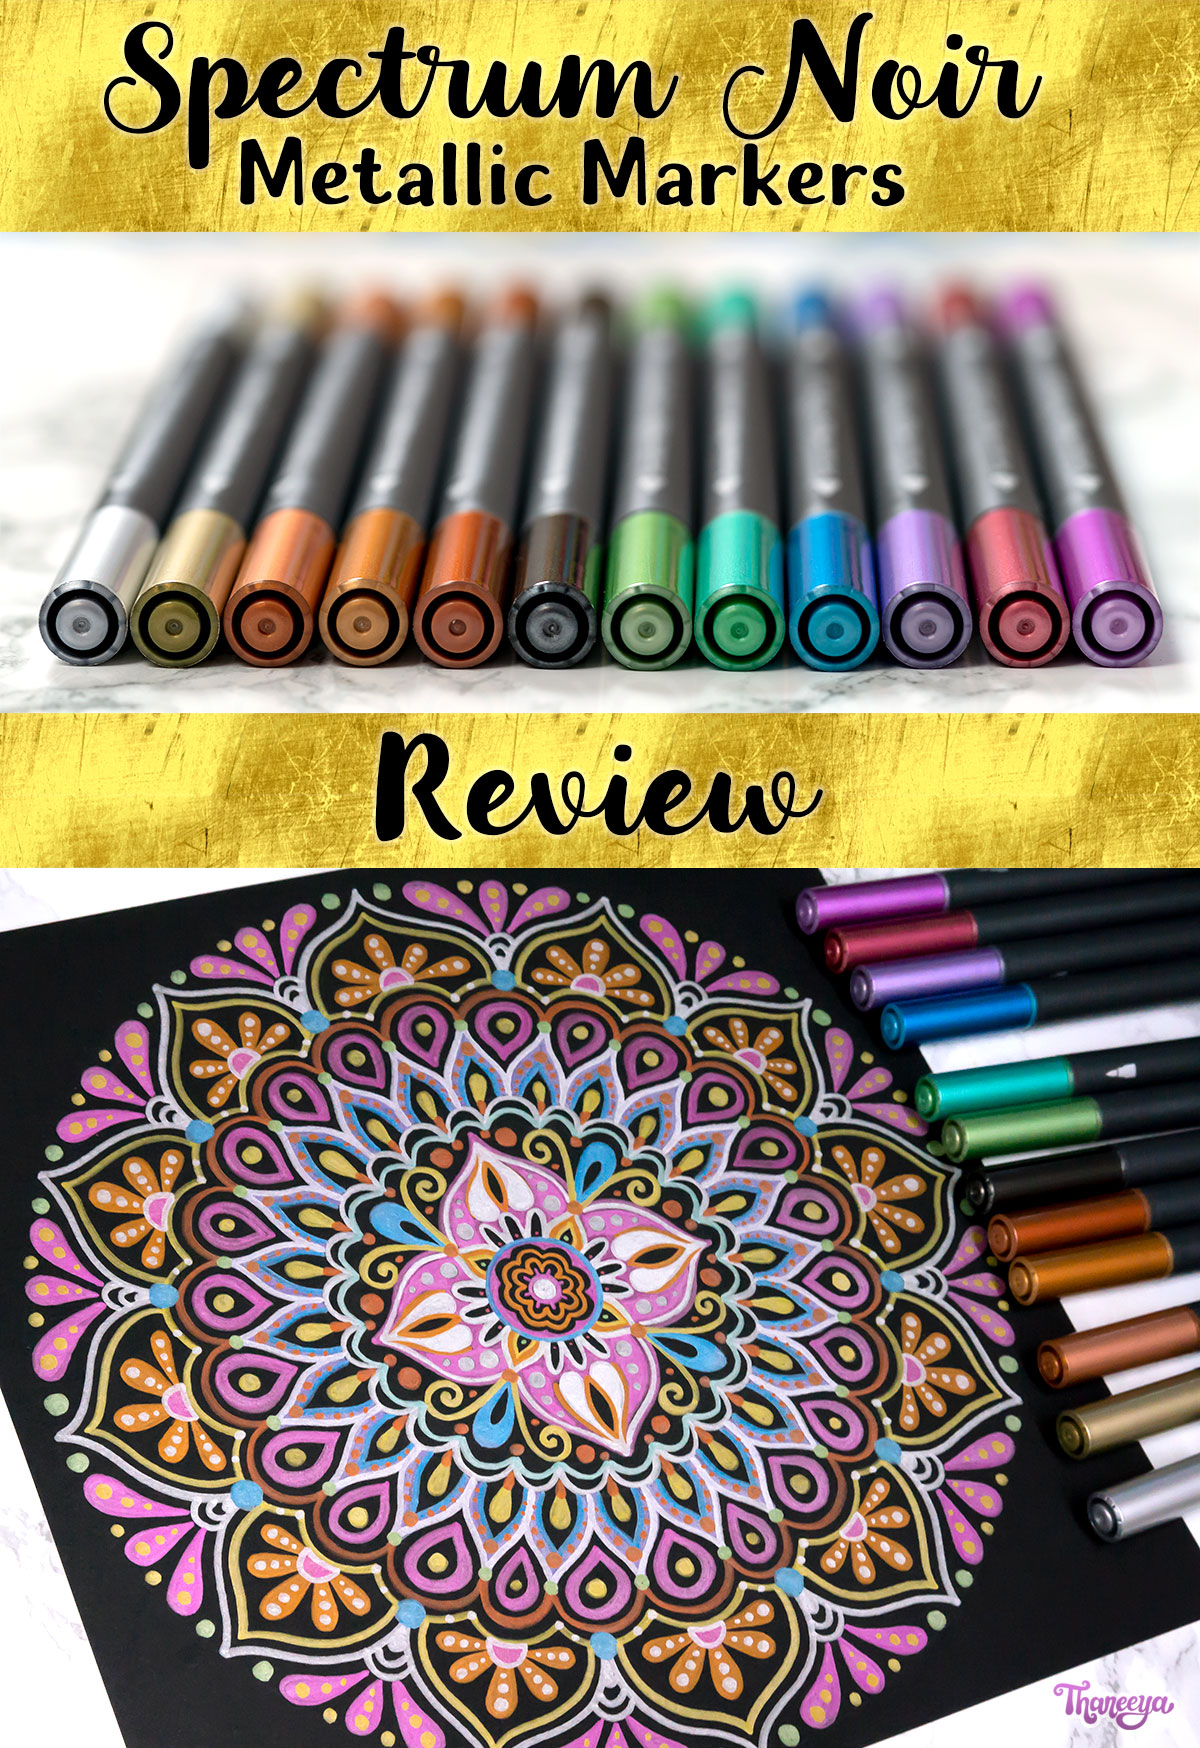 Spectrum Noir Metallic Markers Review: Perfect for Lettering